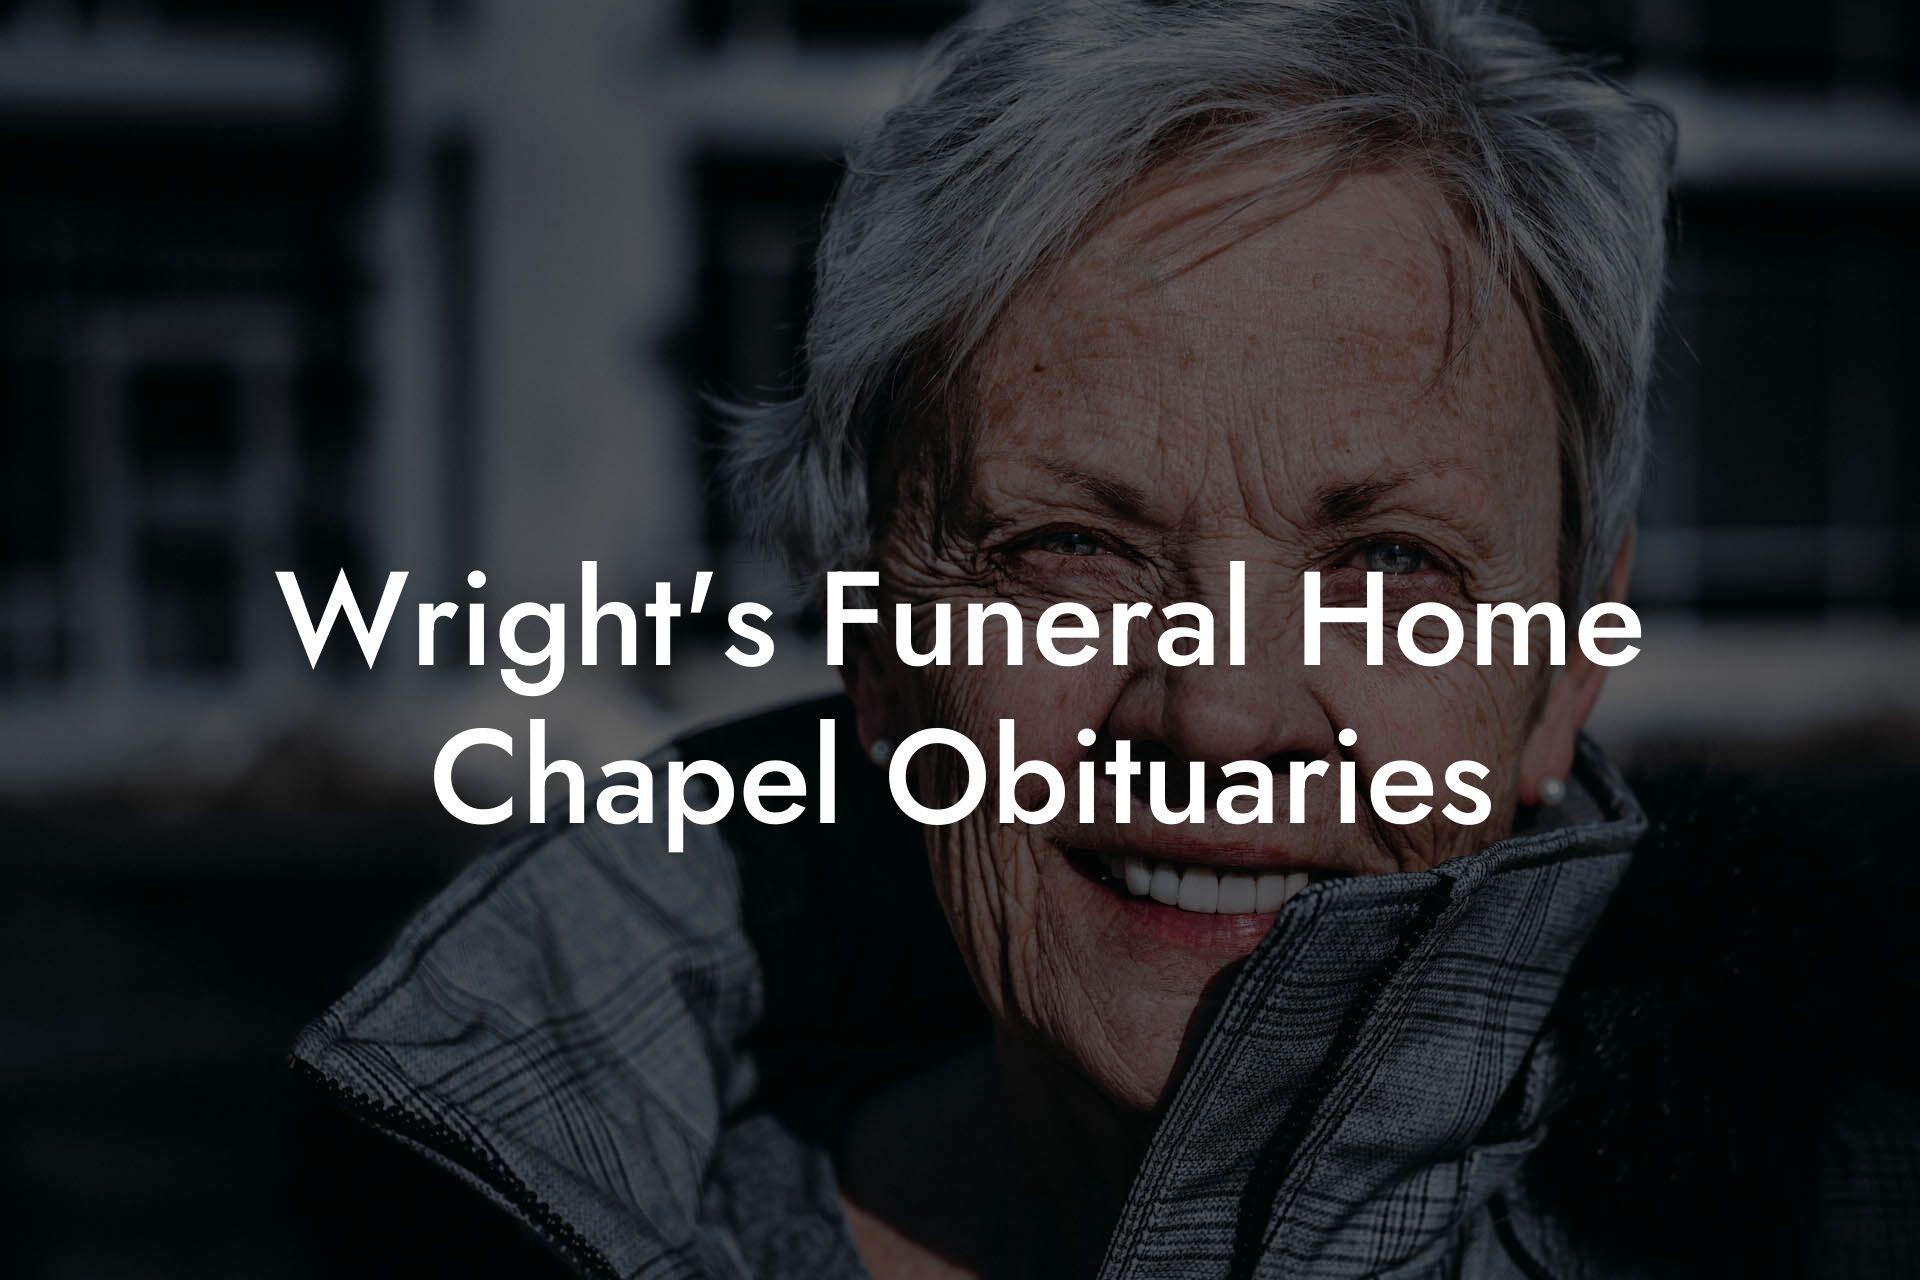 Wright's Funeral Home Chapel Obituaries